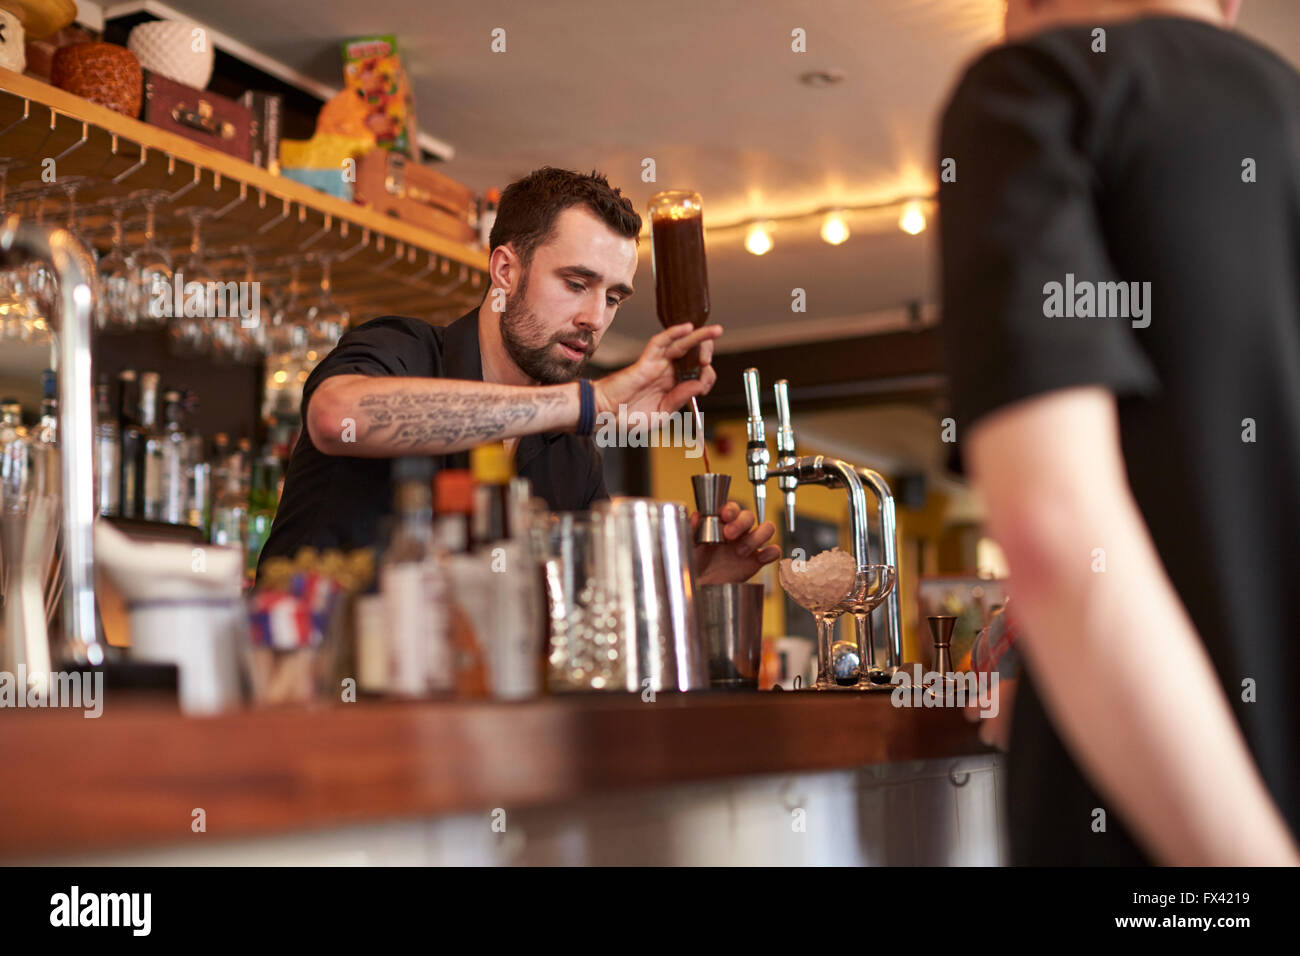 Bartender Giving Cocktail Making Lesson to Friends In Bar Stock Photo -  Alamy